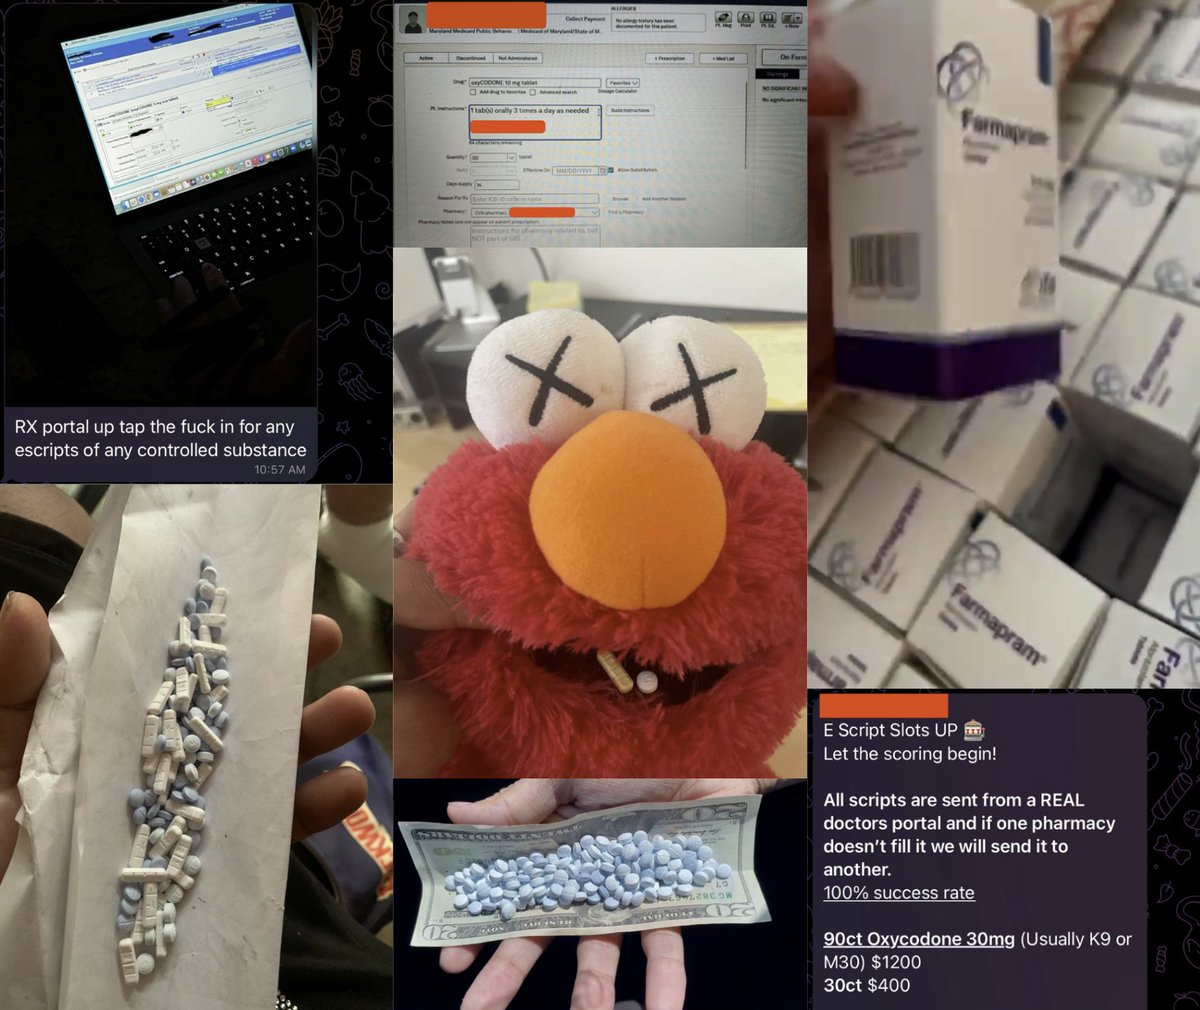 New from 404 Media: hackers are doxing doctors, gaining access to drug ordering platforms then buying (and selling) massive quantities of oxy, Adderall, more. Not just series of breaches across industry, but fundamental undermining of prescription system 404media.co/how-hackers-do…